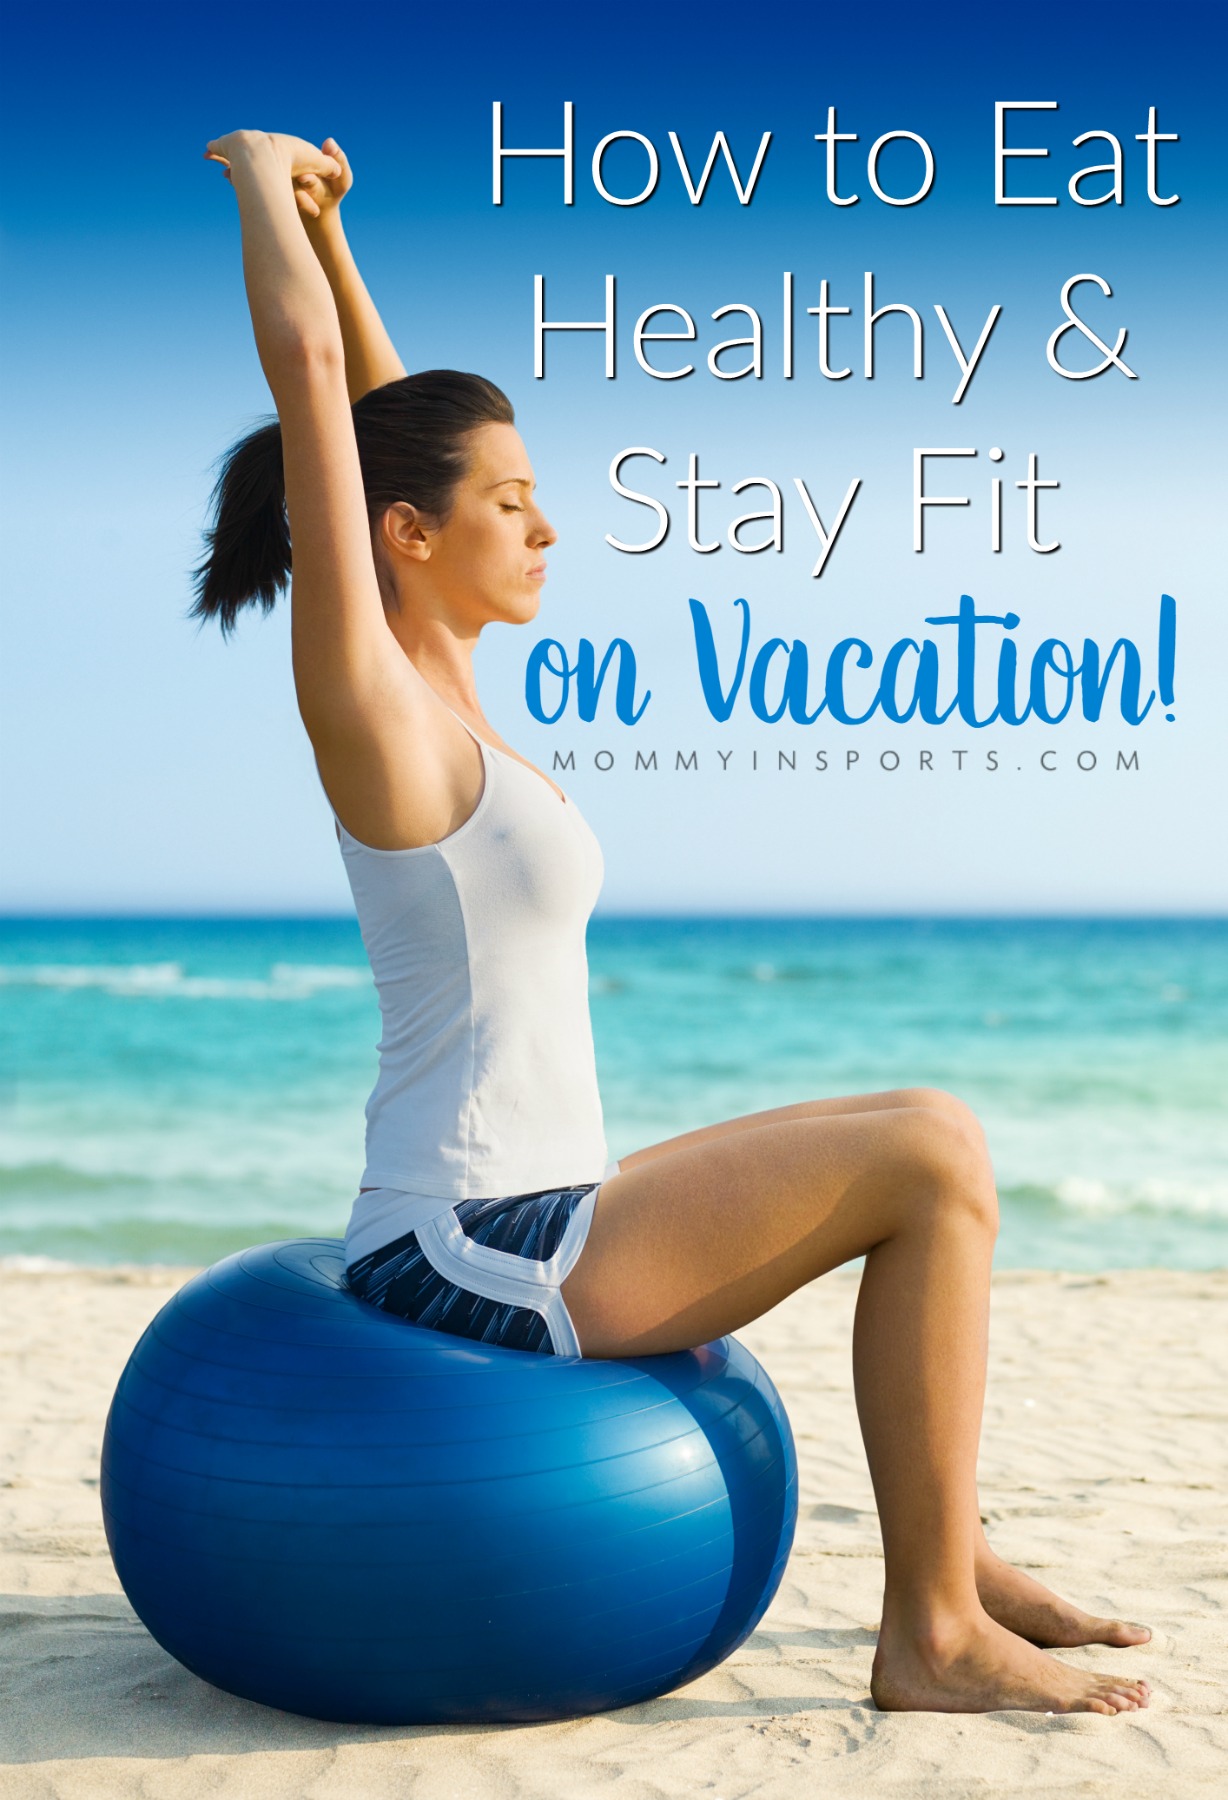 Heading out on a vacation? It's hard to diet and exercise sometimes, but there are ways to not overindulge too much! Read these tips on how to eat healthy & stay fit on vacation!